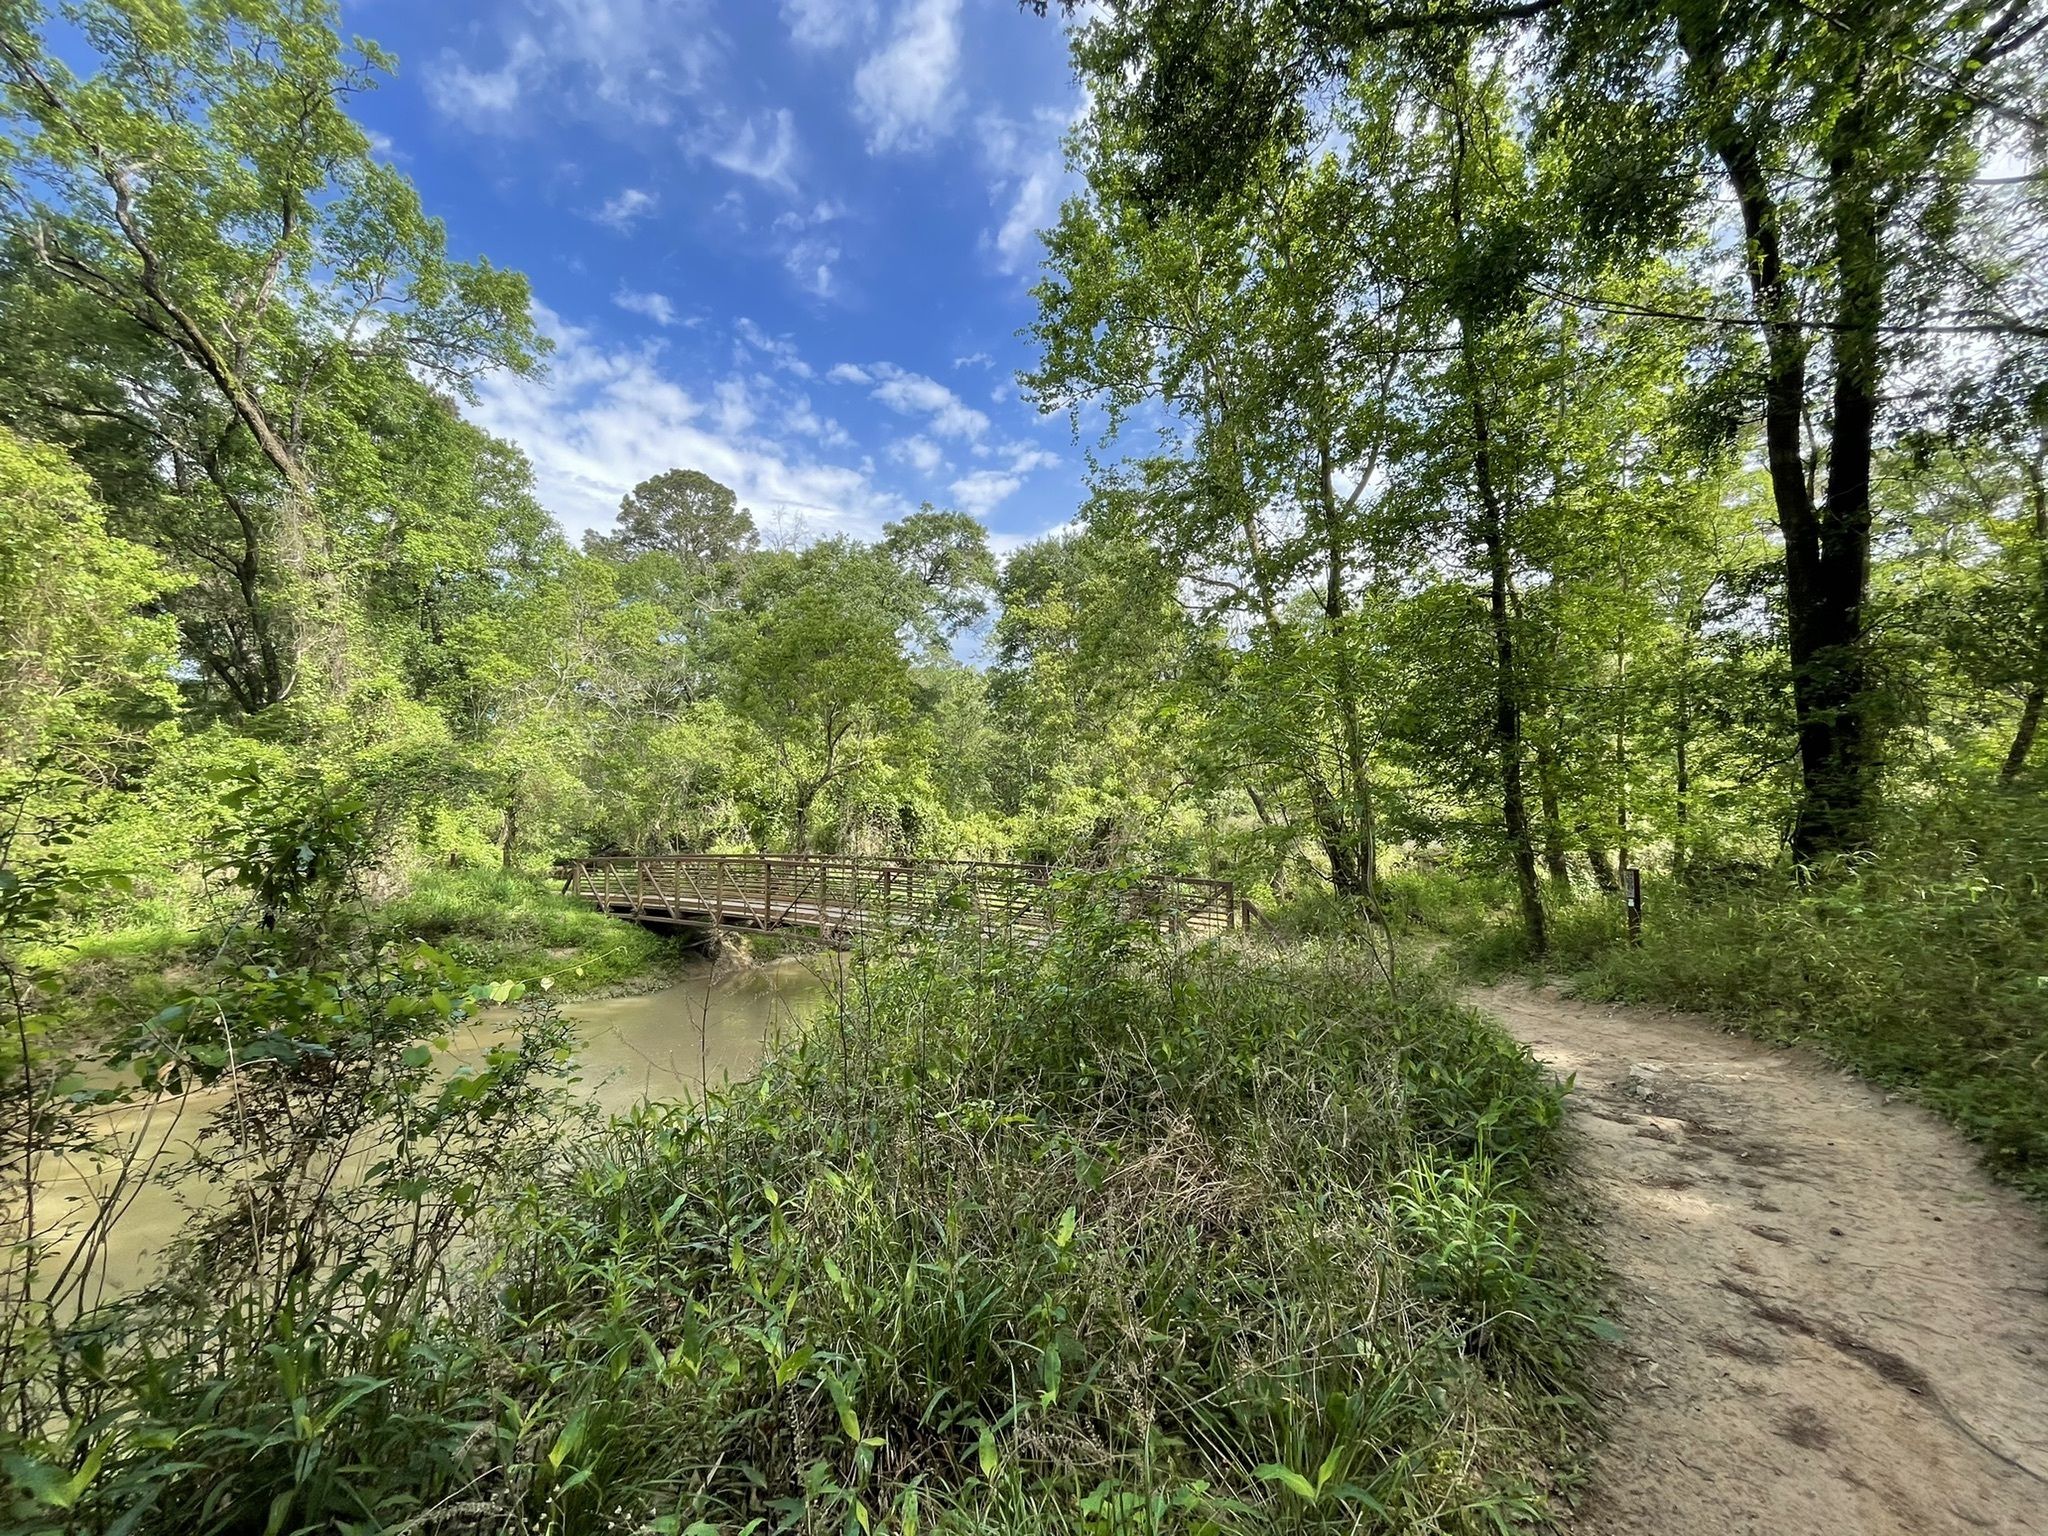 Best Hikes In Texas: Spring Creek Nature Trail